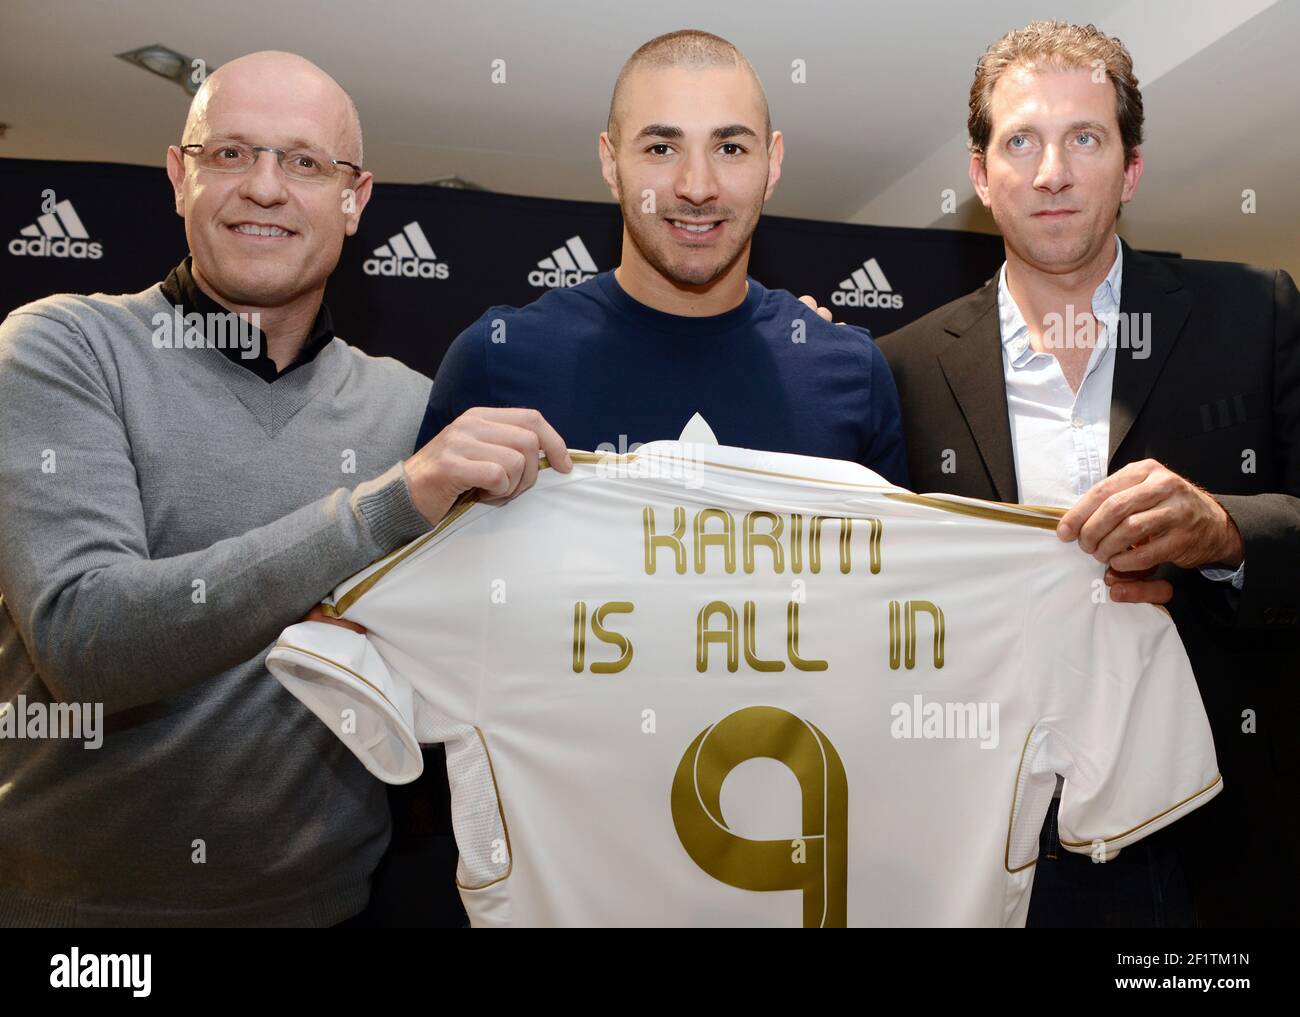 FOOTBALL - KARIM BENZEMA PRESS CONFERENCE AND ADIDAS CONTRACT SIGNATURE -  ADIDAS STORE CHAMPS ELYSEE - PARIS - 22/05/2012 - ALAIN POURCELOT / ADIDAS  MANAGER - KARIM BENZEMA - PHOTO PHILIPPE MILLEREAU / KMSP / DPPI Stock  Photo - Alamy